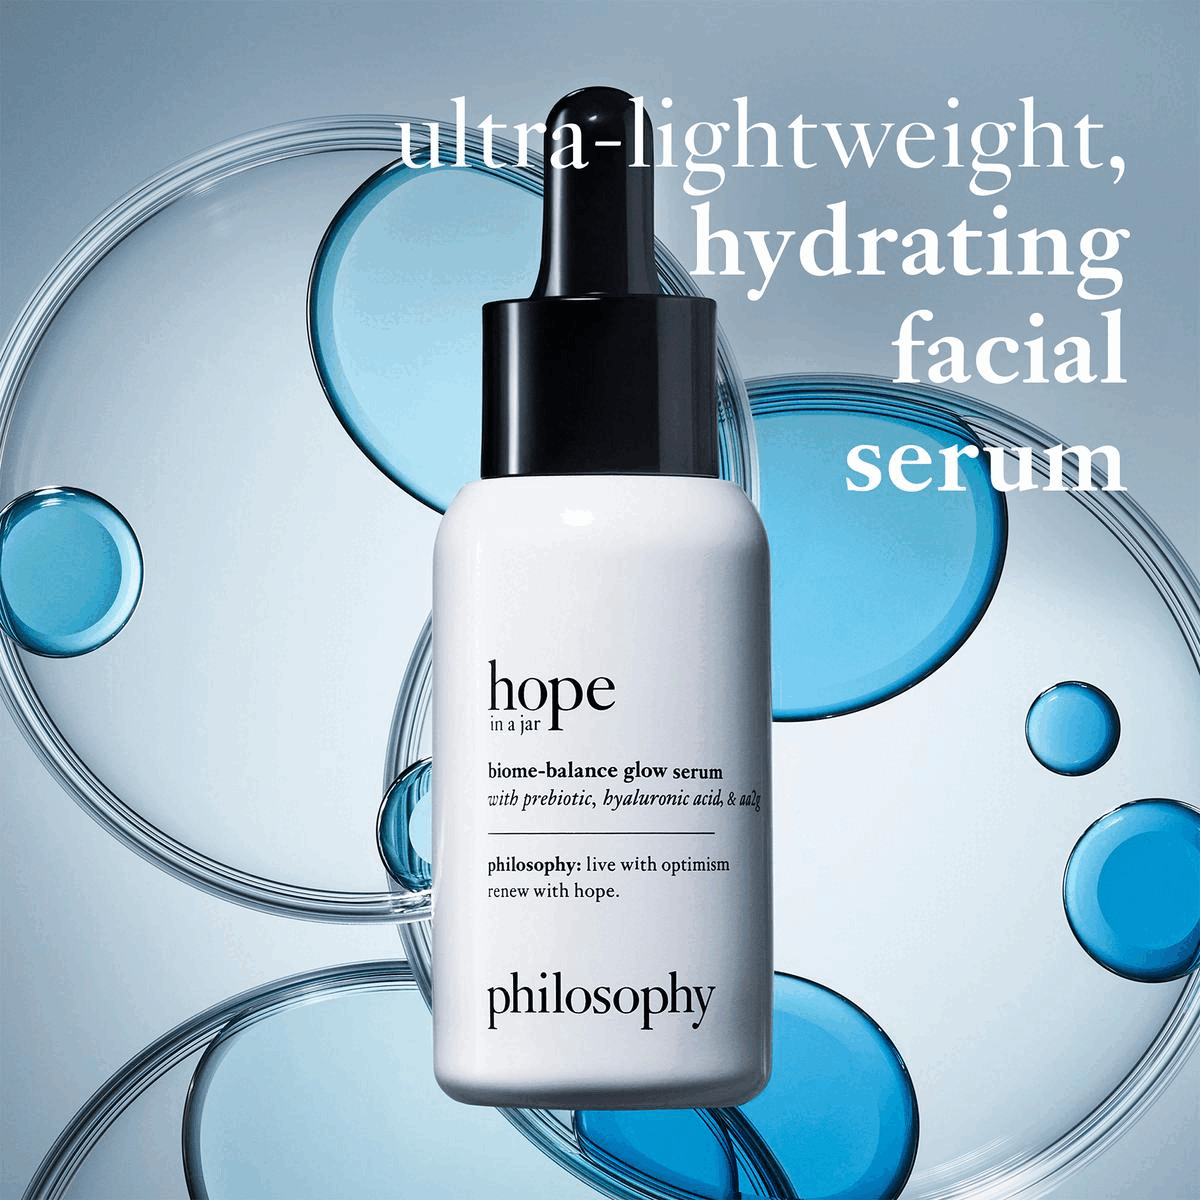 Image 1 -Ultra lightweight hydrating facial serum Image 2- Delivers powerful skin barrier protection based on a clinical study of 35 women aged 18-65 Image 3- skin is instantly hydrated, glowing and smooth Image 4-before and after 4 weeks hope in a jar balance biome serum Image 5- old vs new Image 6- hydrate and glow regimen 